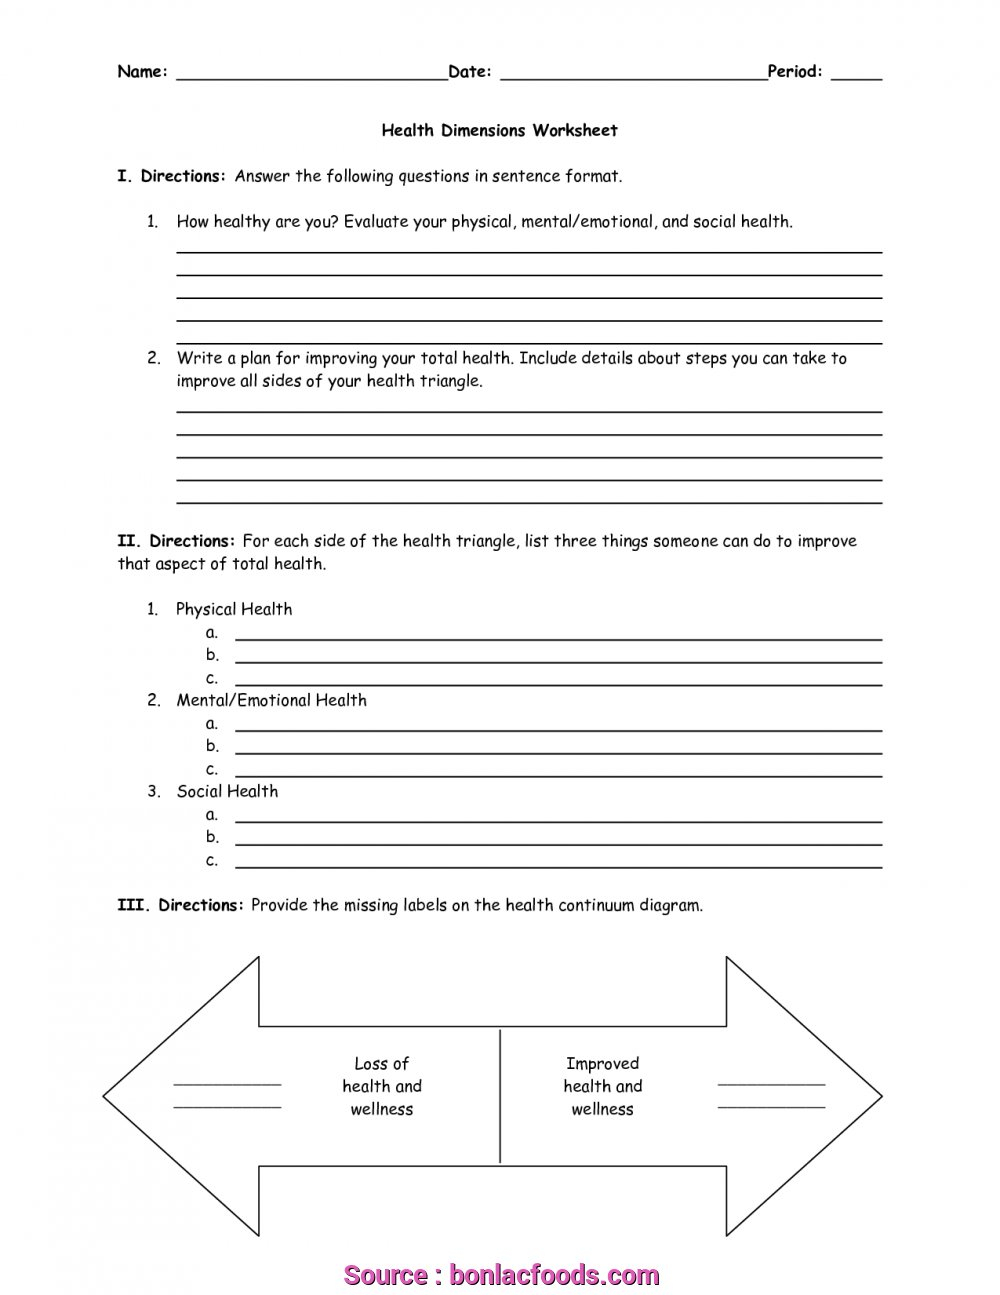 6 Creative Lesson Plans Health Triangle Activities Photos  Ehlschlaeger And Health Triangle Worksheet